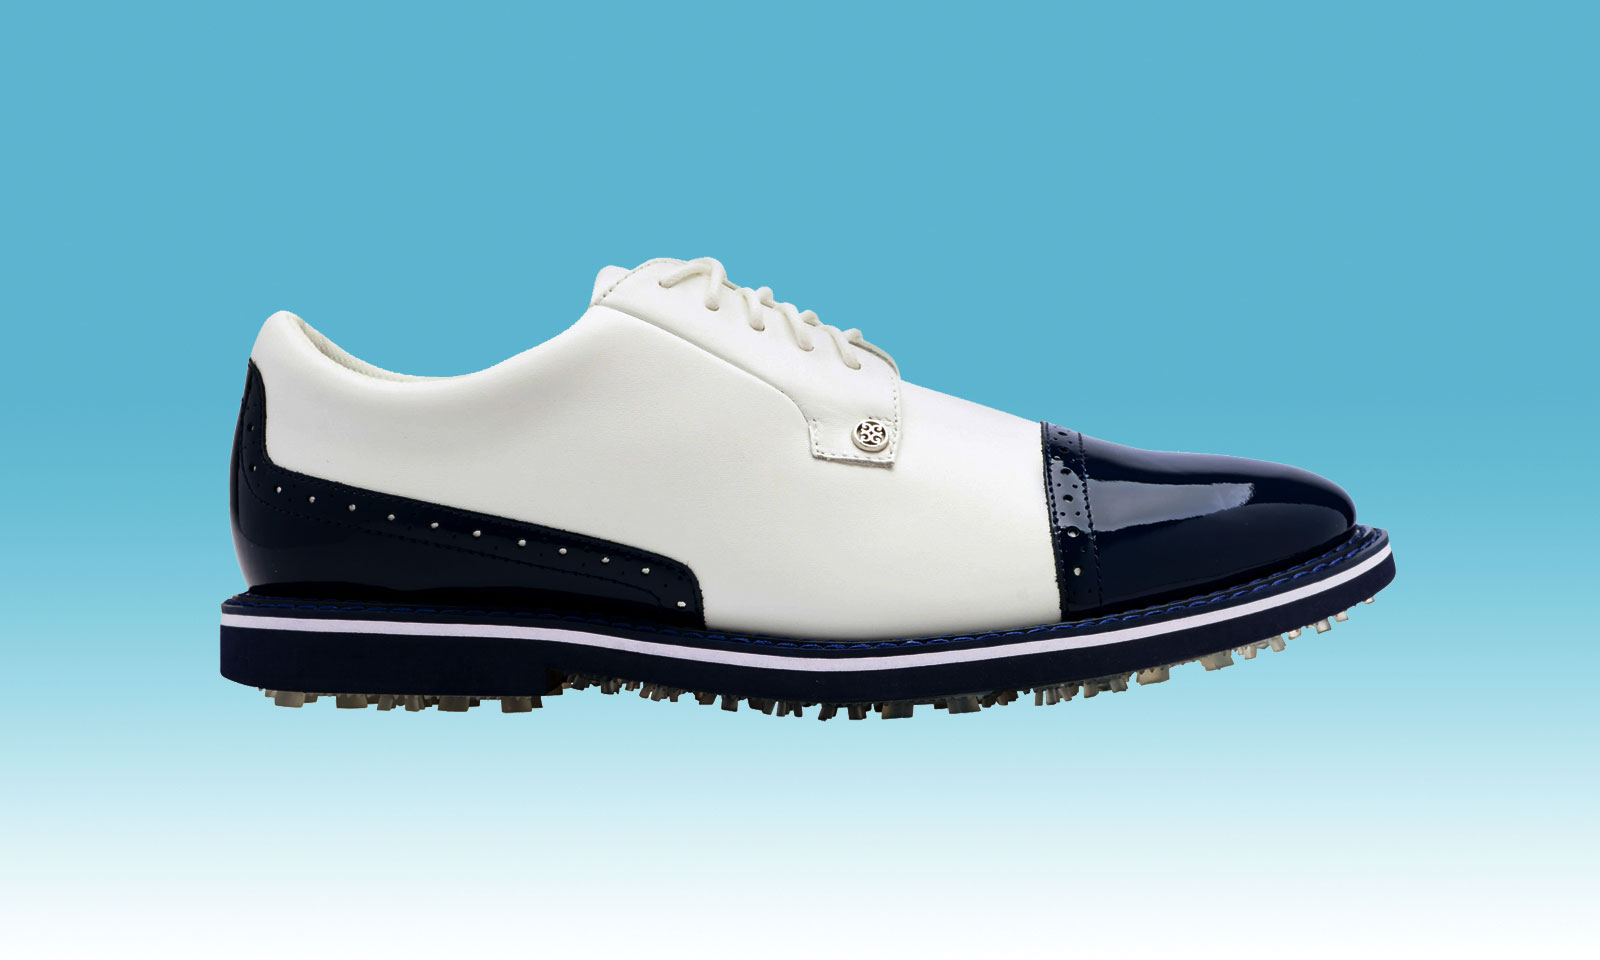 Golf shoes for on and off the course